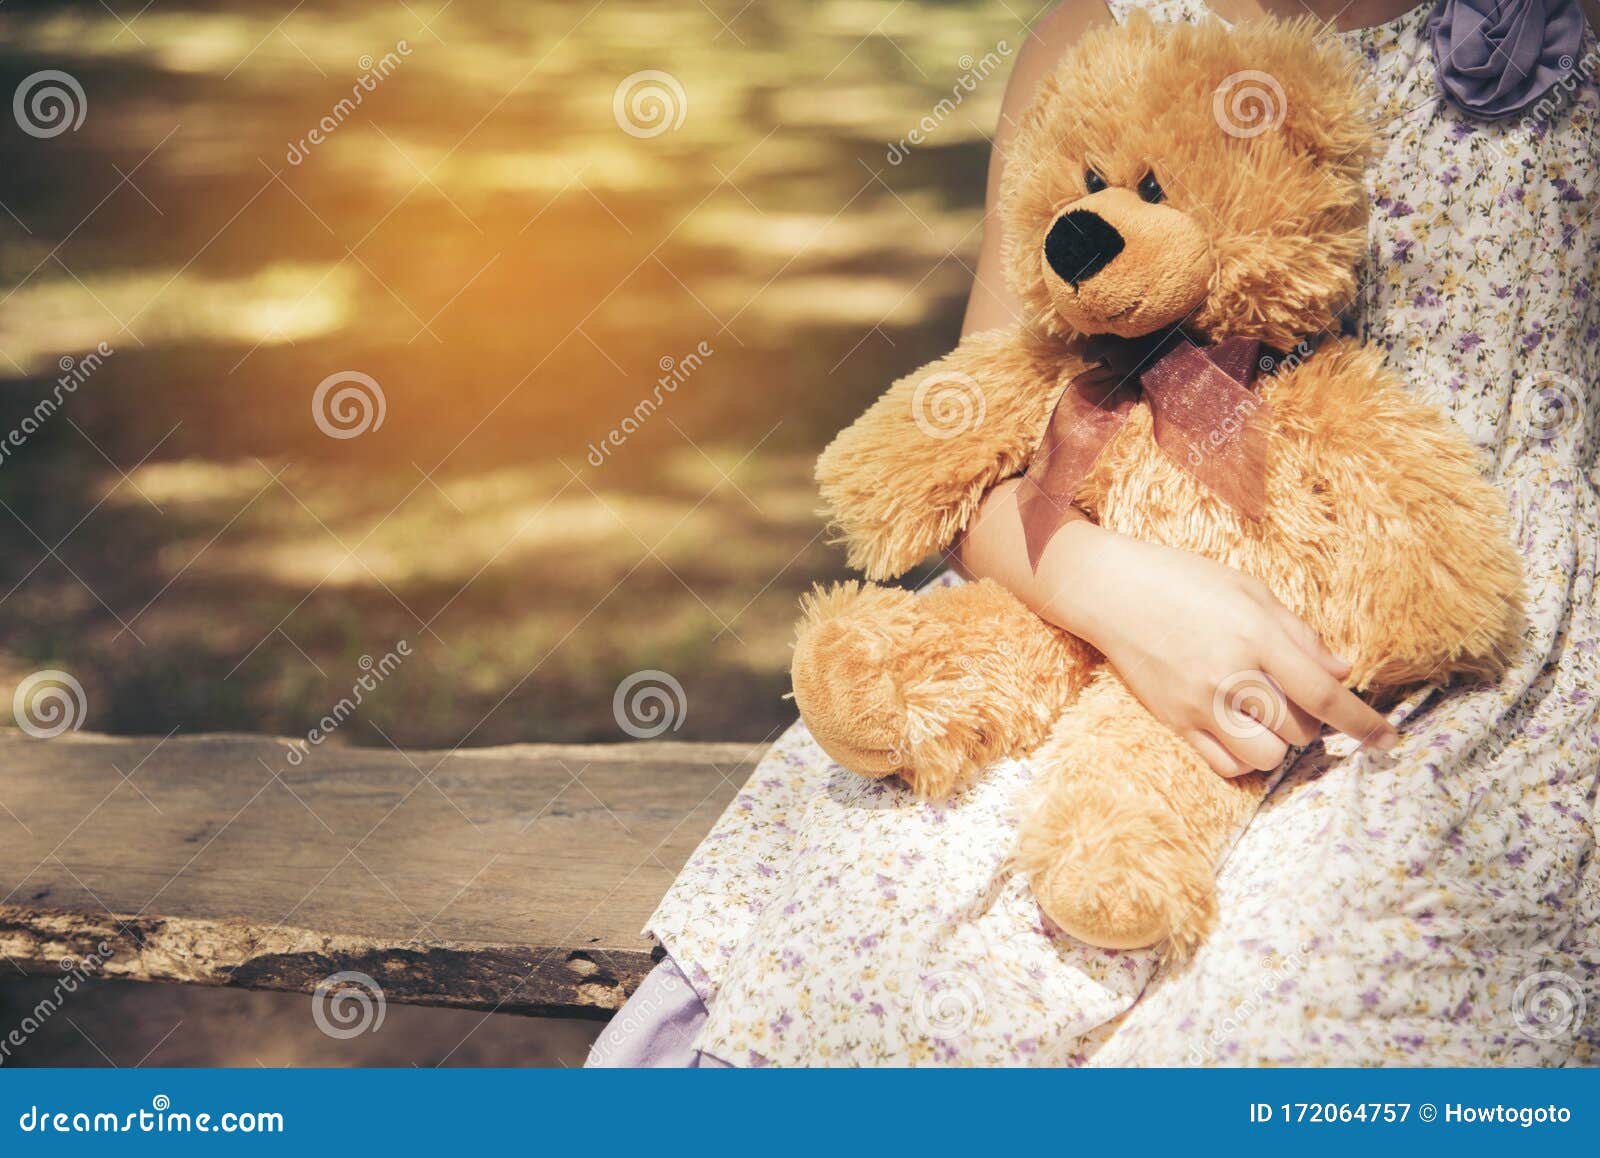 Sad Girl Feeling Alone in the Park. Lonely Concepts Stock Image ...